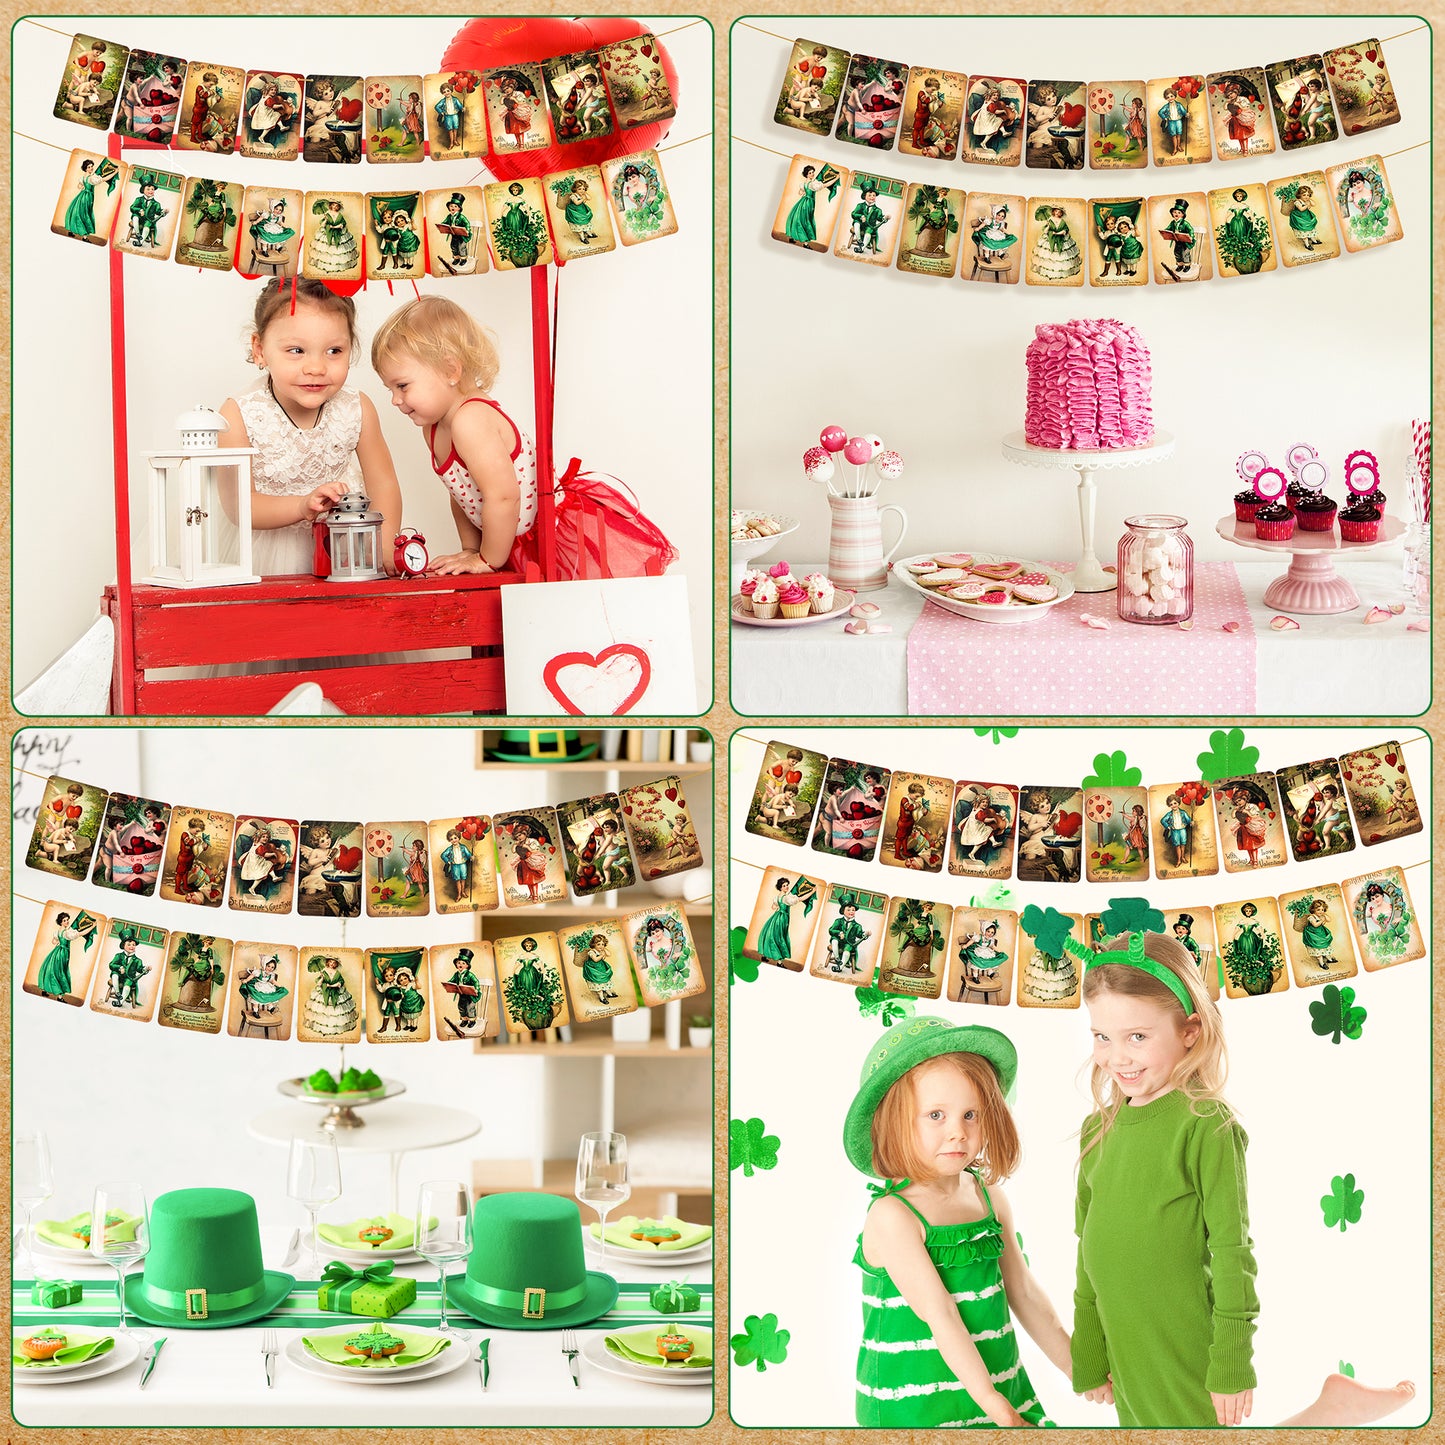 2 Vintage Style Valentine's Day St. Patricks Day Hanging Banner, Party Supplies Hanging Garland Ornaments Cupid Clover Decorations, Valentine Irish Day Sign for Holiday Party Home Wall Window Decor